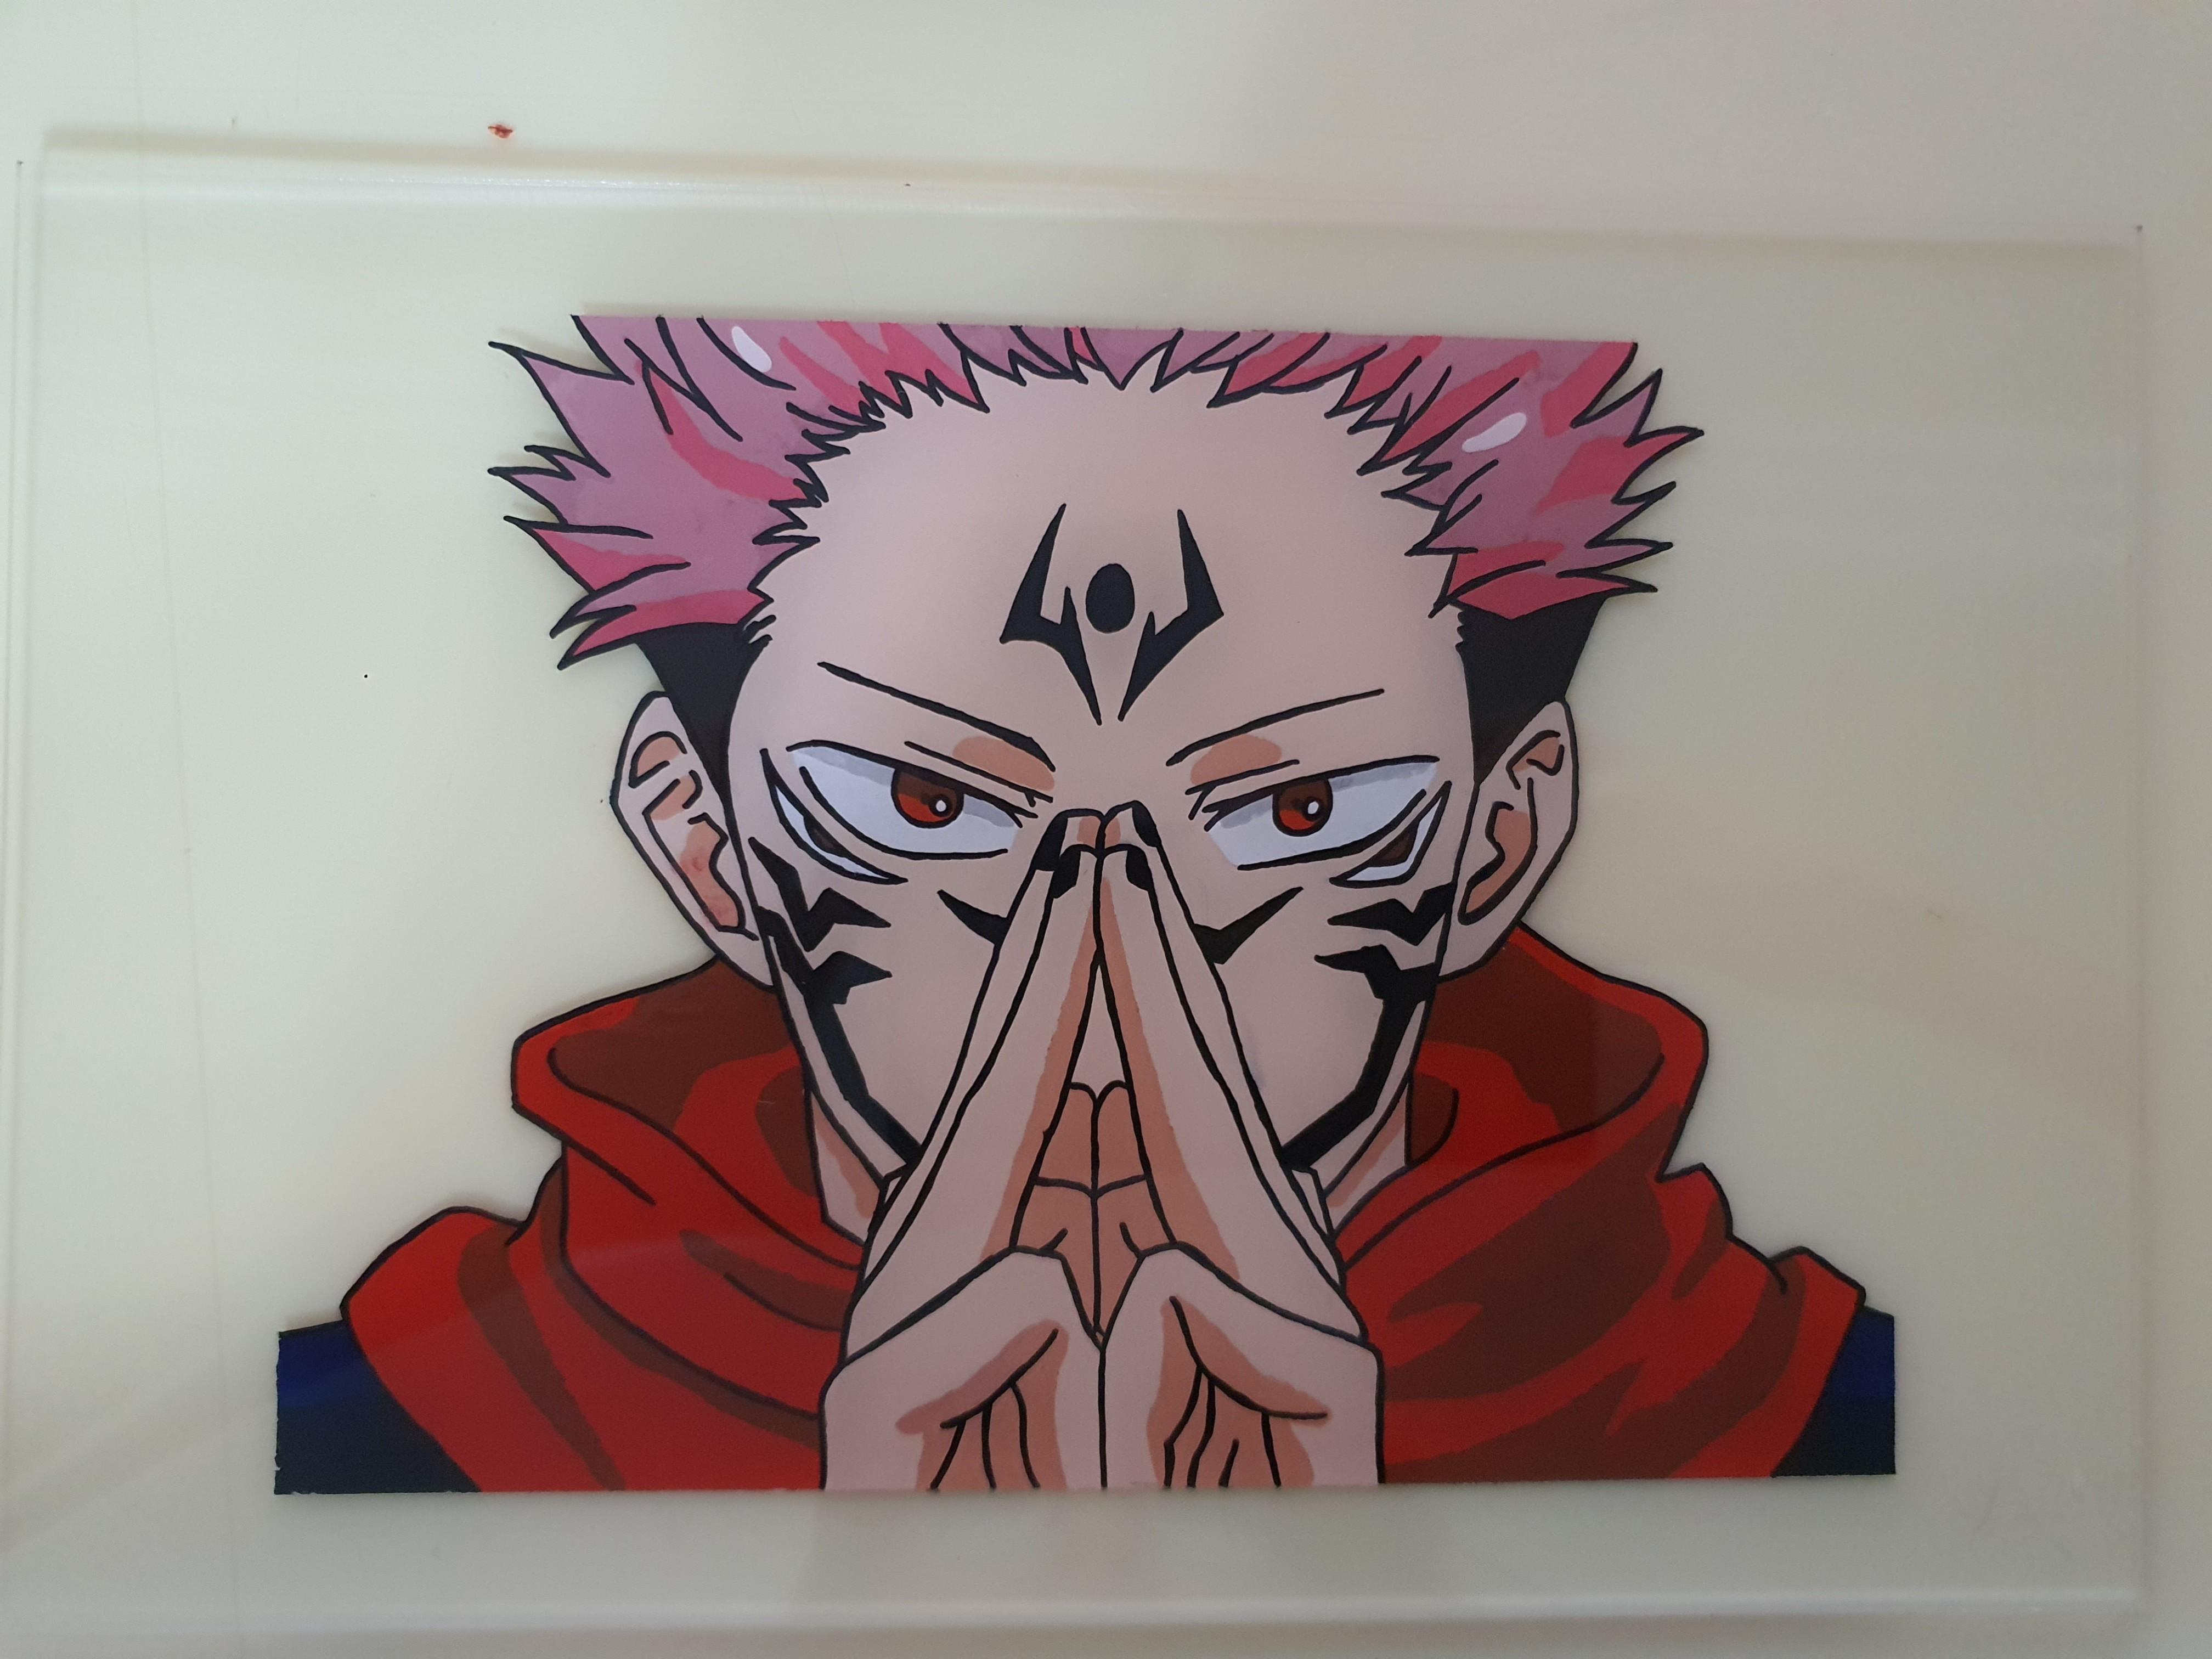 The Experience of Making Tik Tok Anime Glass Art – In Third Person